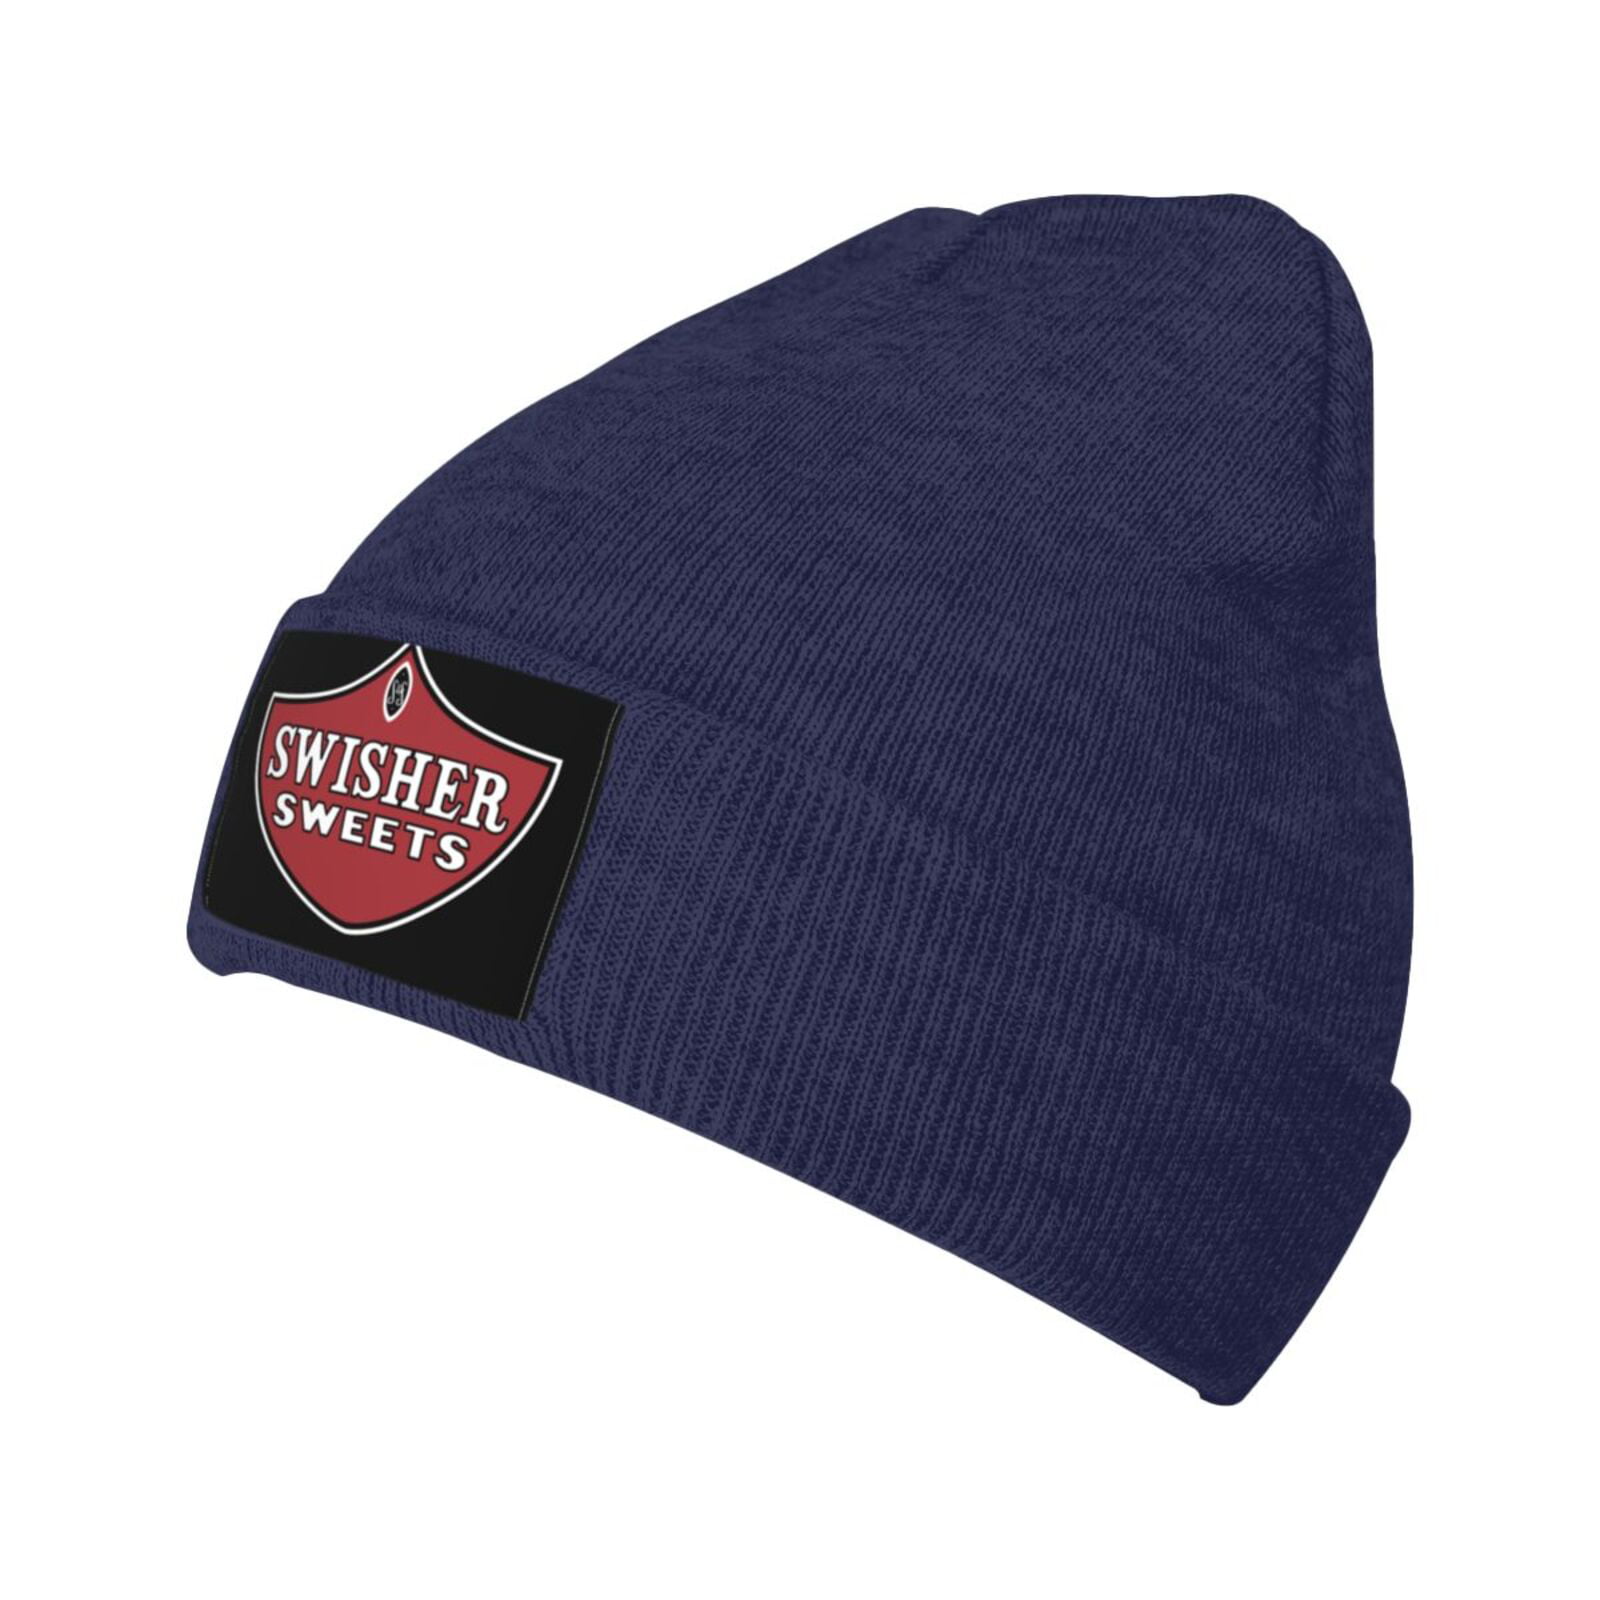 Hat Softknit For Cap Outdoor \\r\\nVikings Navy Adult Swisher Sweets Beanie Stocking Slouchy Cap Headwear Blue Winter